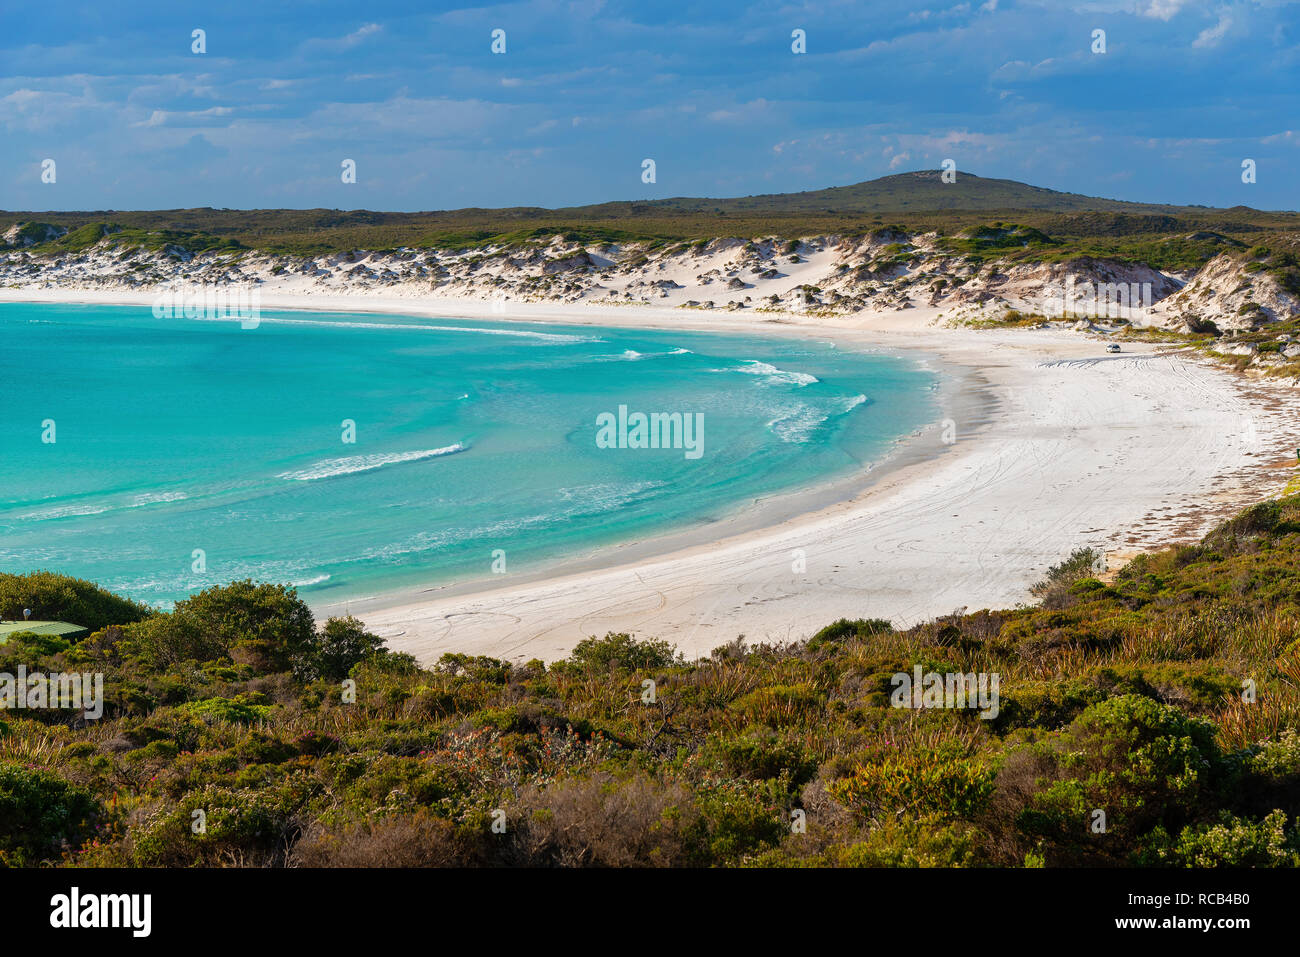 Stunning panorama of Wharton Beach, one of the most beautiful beaches in Australia, in the rural Cape Le Grand National Park, South Western Australia Stock Photo